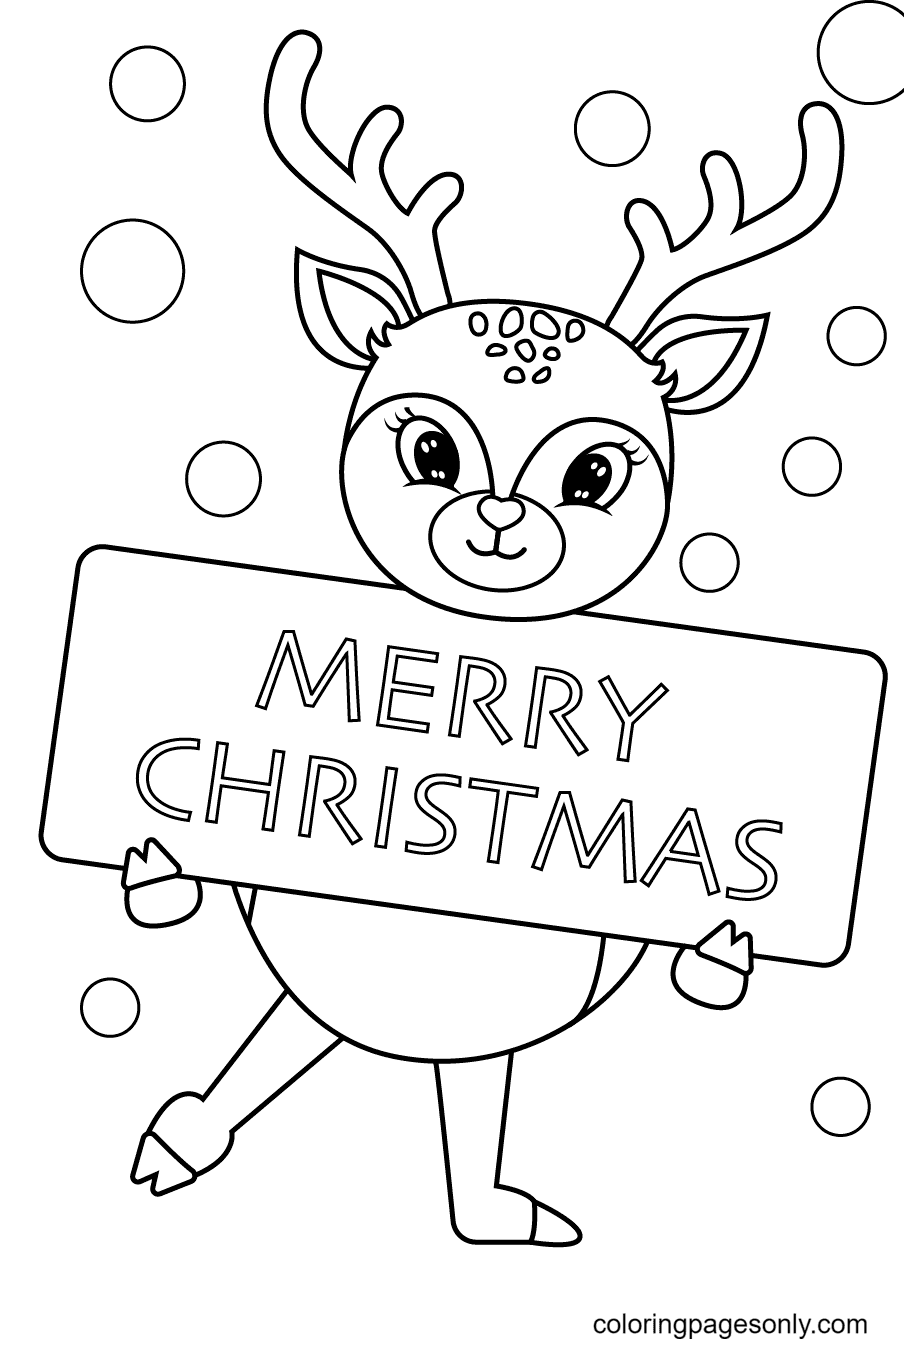 Reindeer coloring pages printable for free download